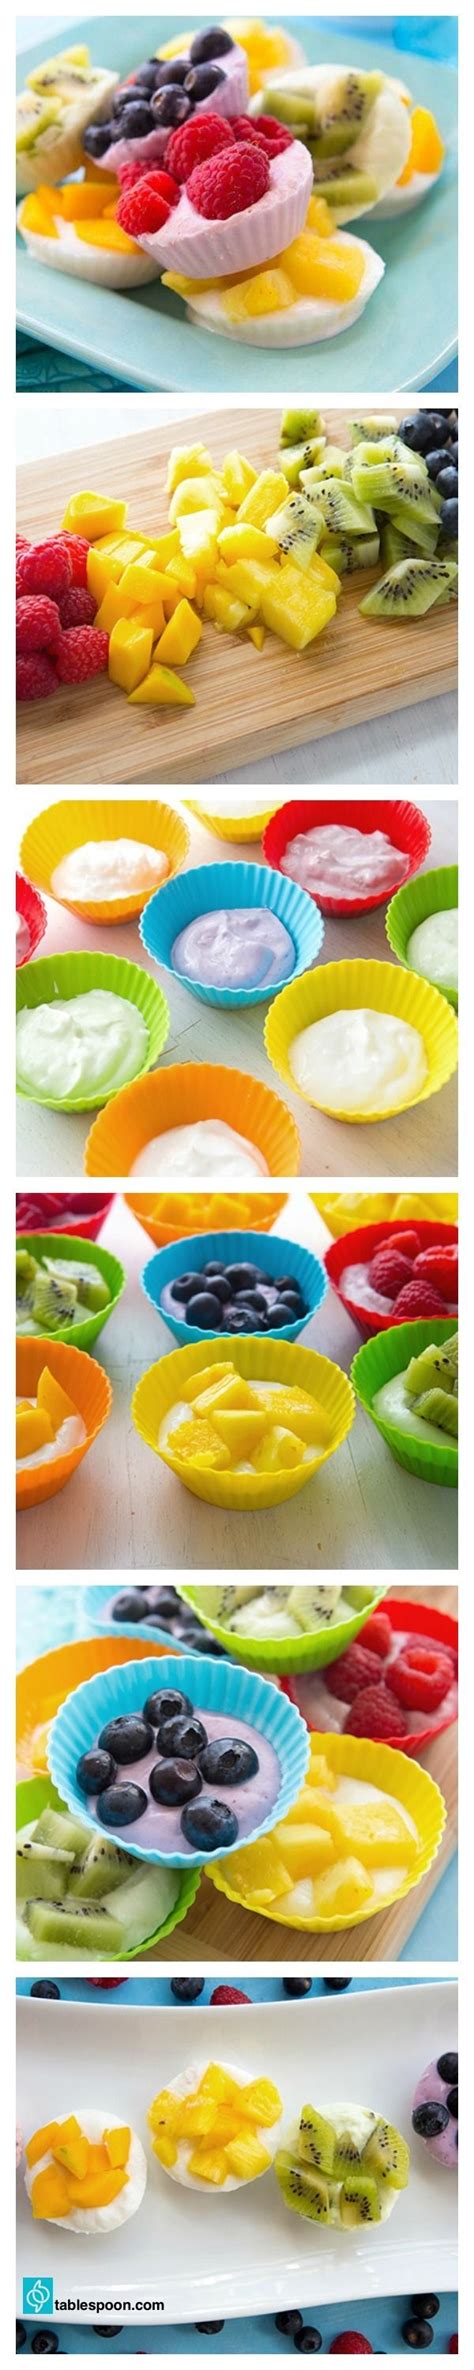 A Fresh New Way To Enjoy Fro Yo These Creamy Bites Come In All The